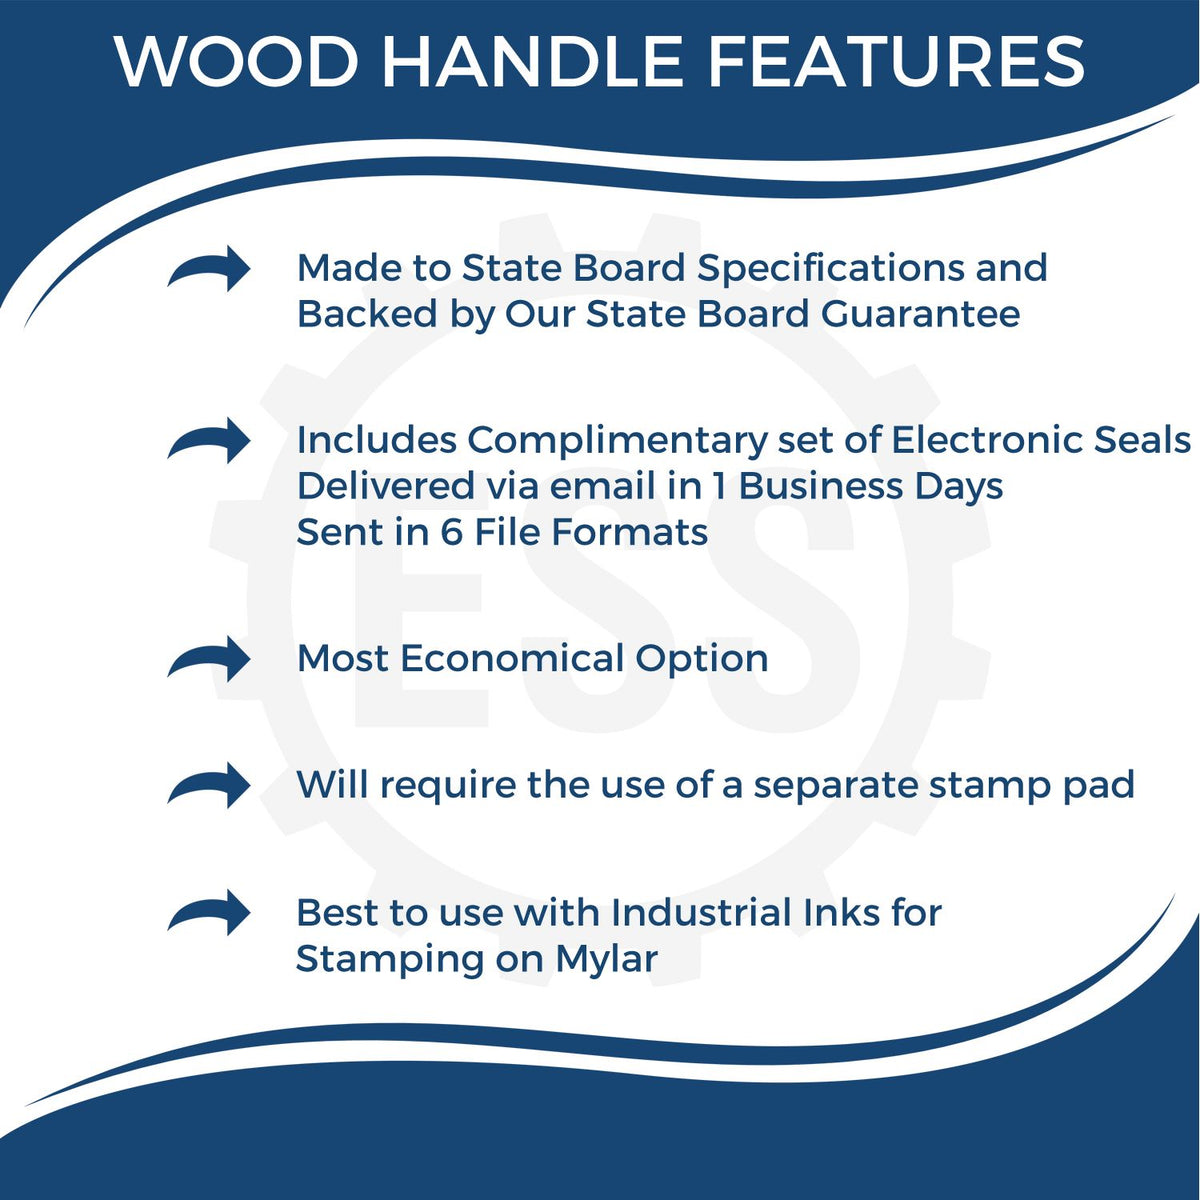 A picture of an infographic highlighting the selling points for the Wooden Handle Indiana Rectangular Notary Public Stamp